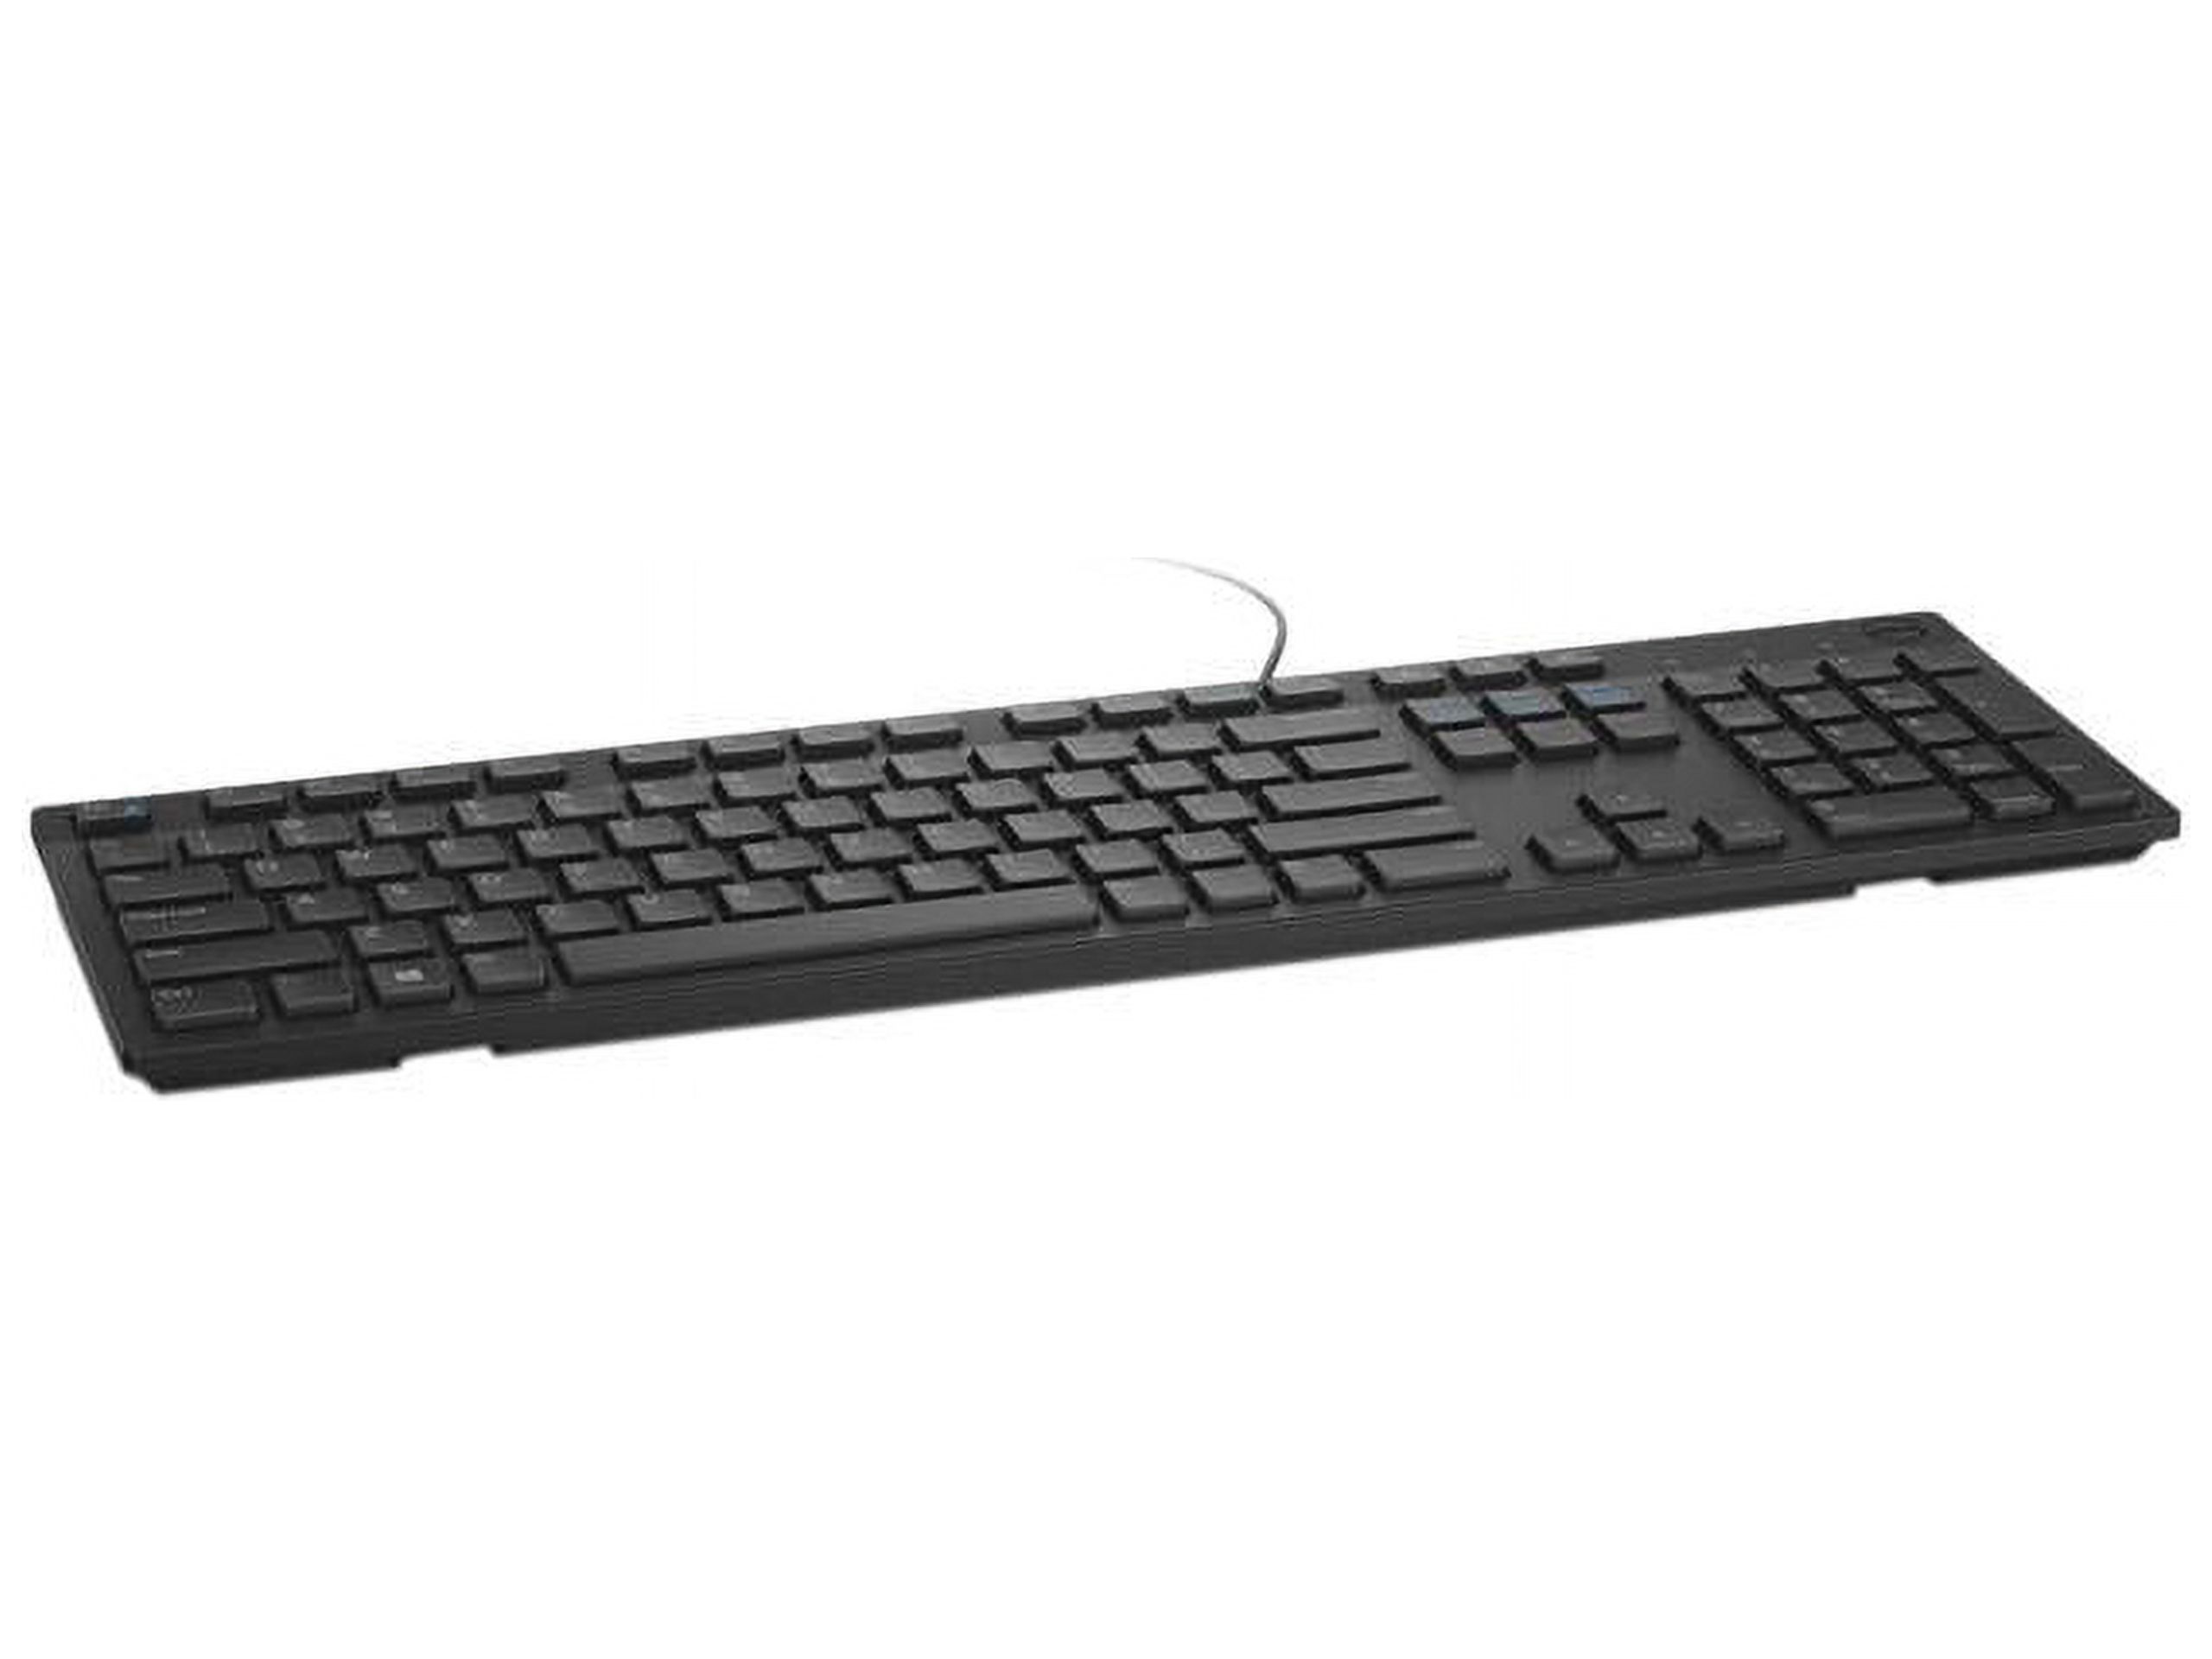 Dell KB216 - keyboard - 580-ADMT - image 1 of 2